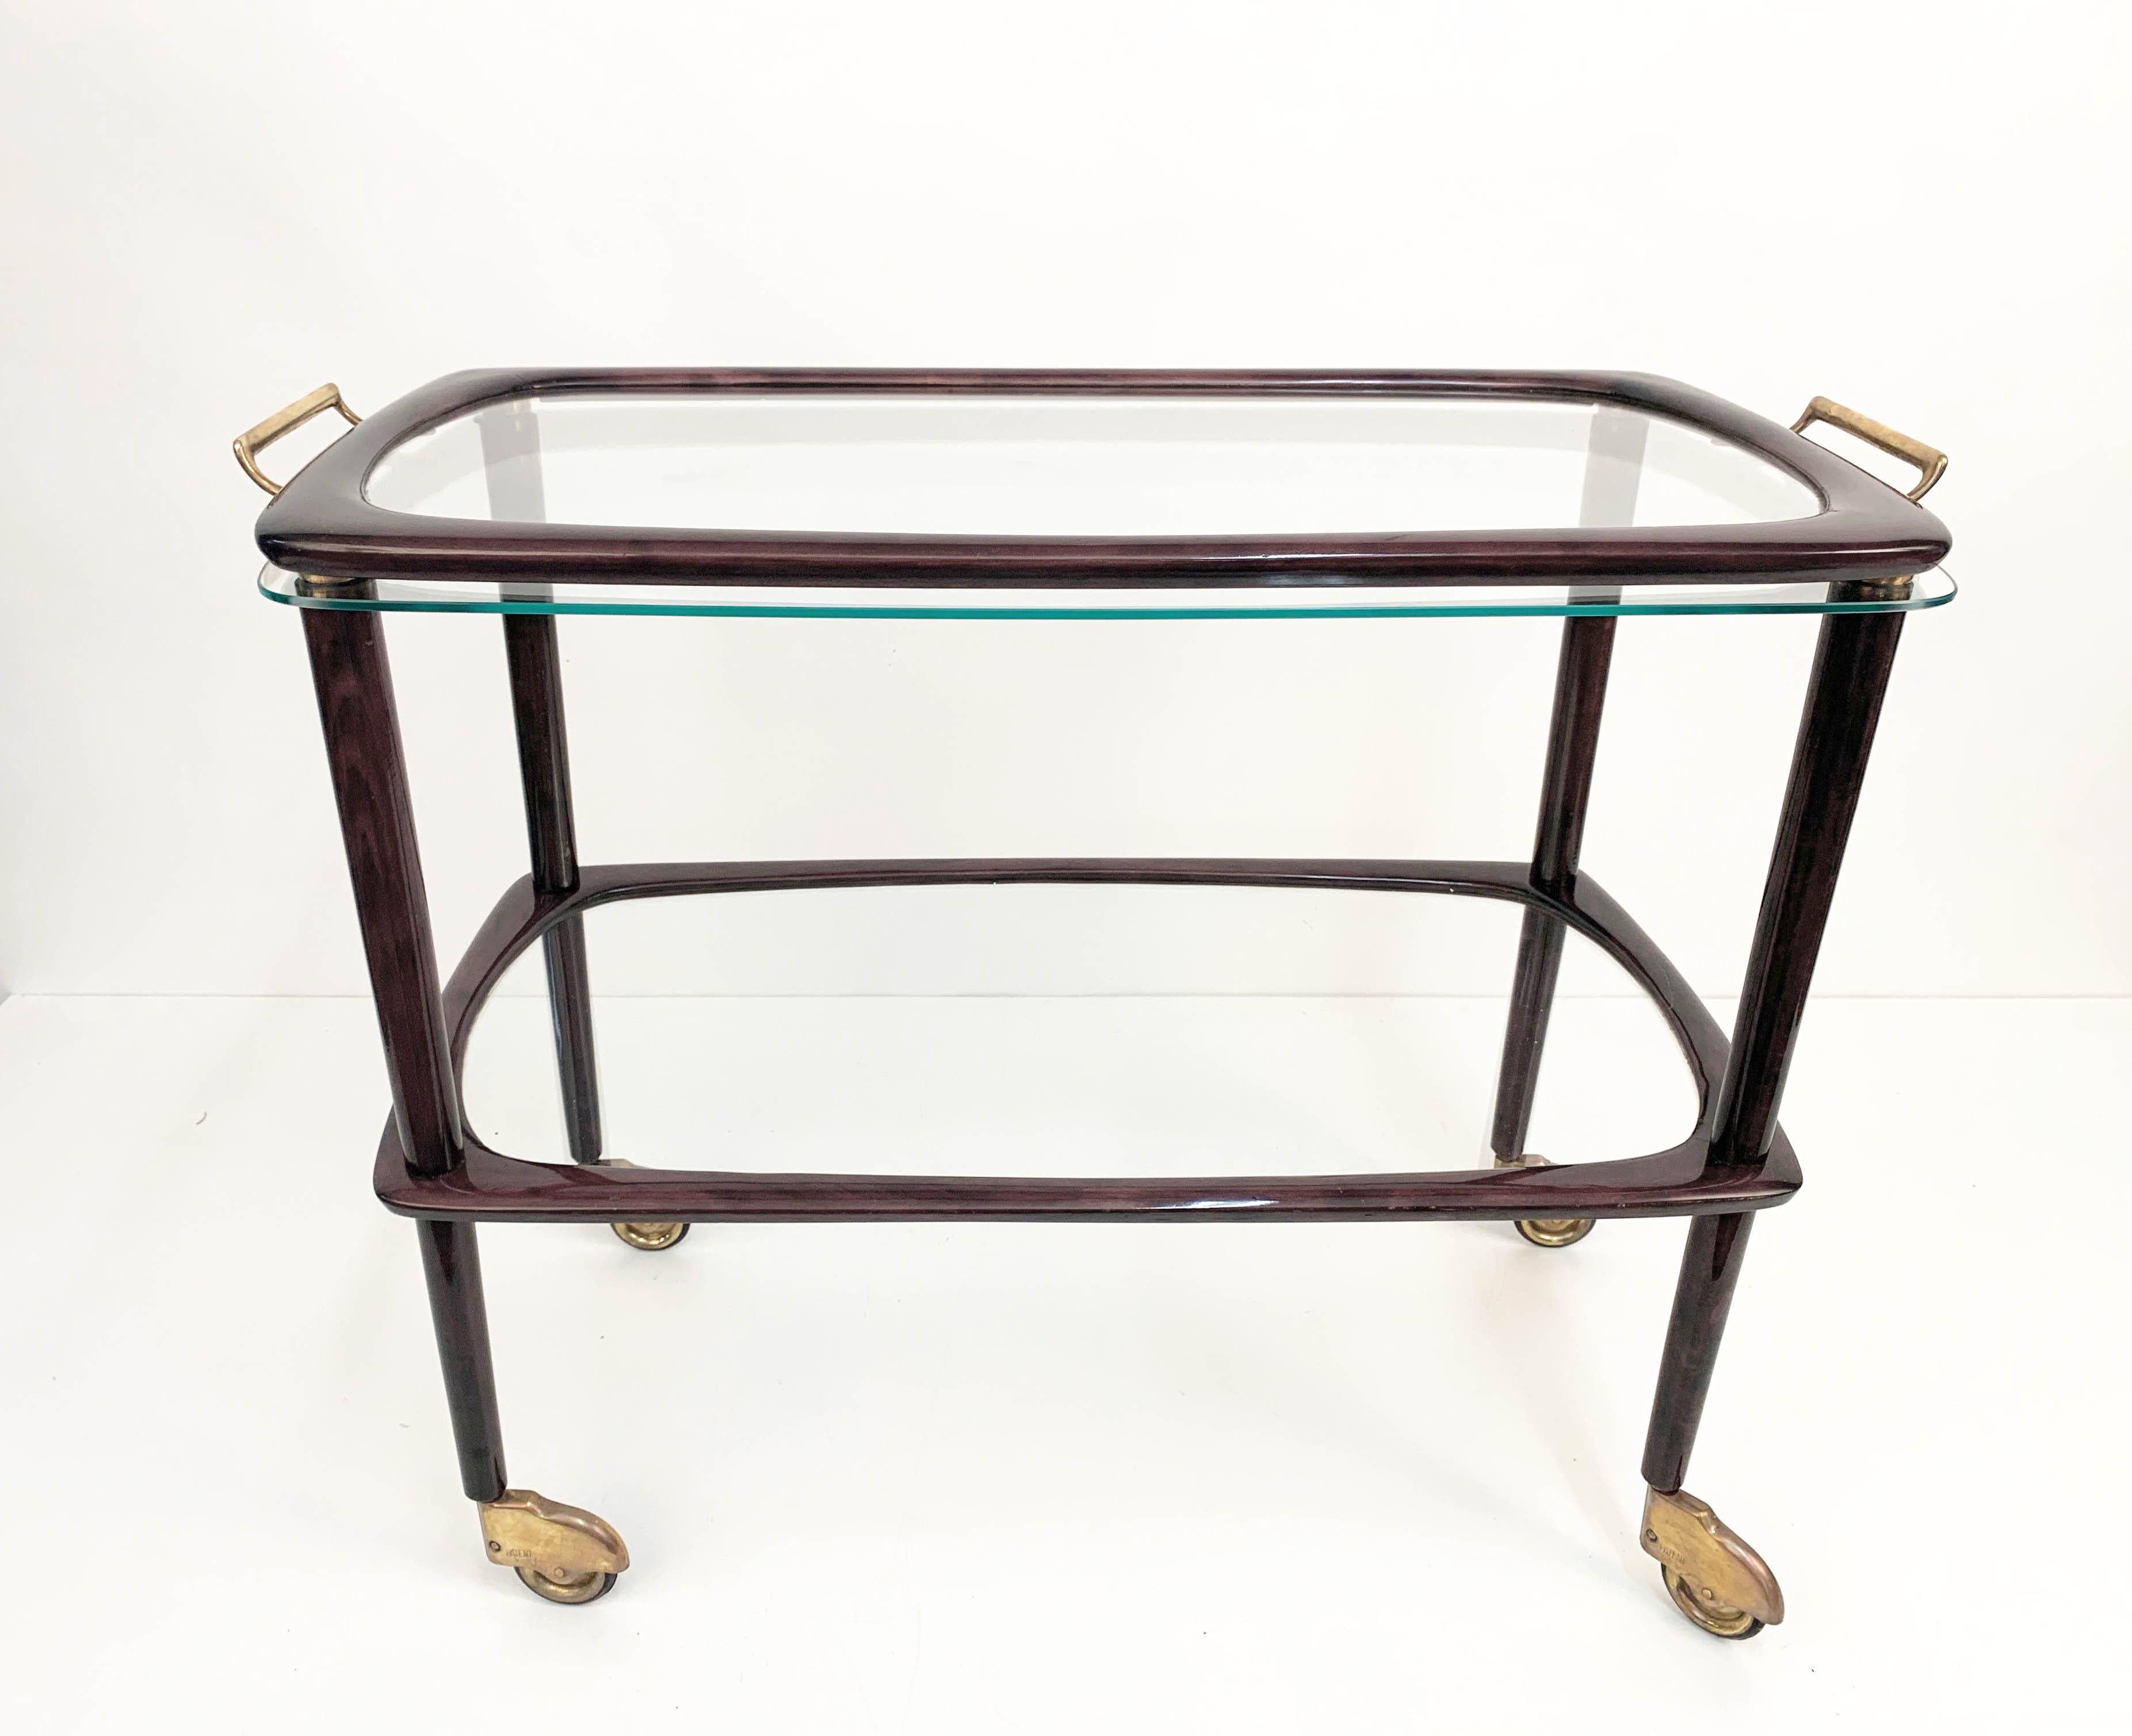 Wonderful Italian wood trolley with glass and brass finishes. It has a removable serving tray with brass and chrome finishes.

This 1950s production is attributed to Cesare Lacca, has wonderful rounded lines and materials plus amazing brass